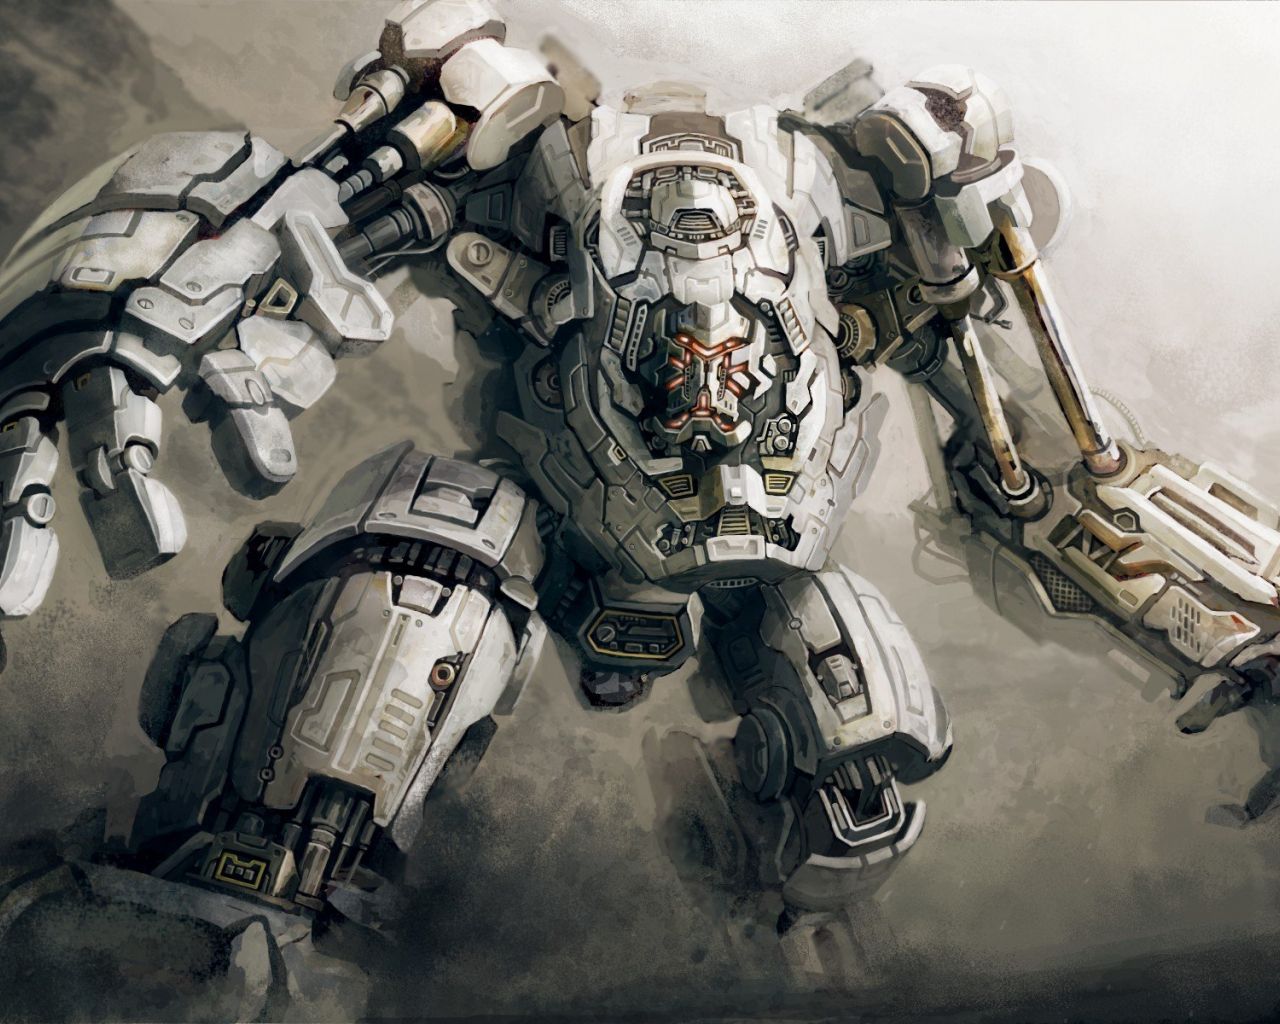 Free download Robots mecha drawings anime wallpaper 1920x1200 257524 [1920x1200] for your Desktop, Mobile & Tablet. Explore Anime Mecha Wallpaper. Mech Wallpaper, HD Mech Wallpaper, Mecha Godzilla Wallpaper